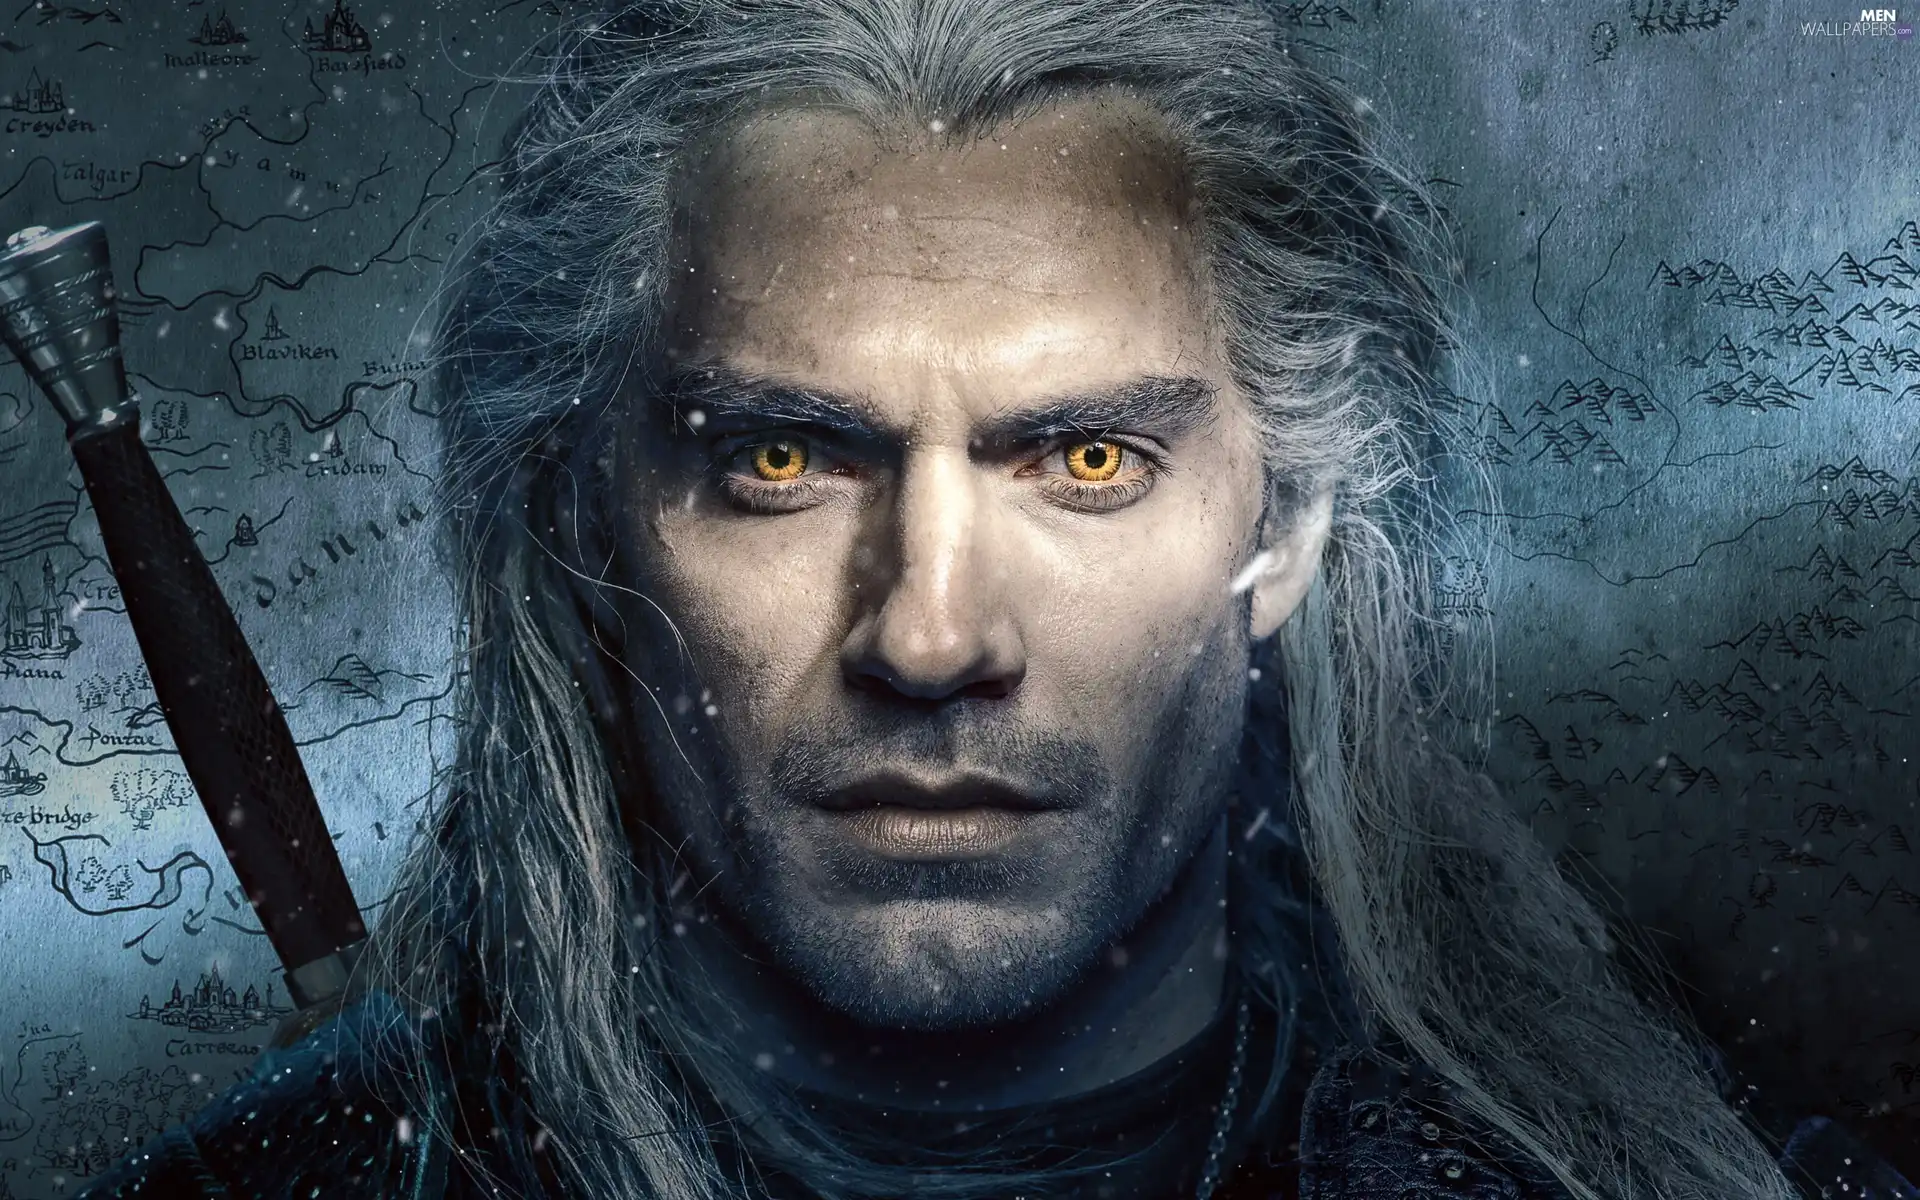 the witcher, series, Henry Cavill, Geralt of Rivia, actor, The Witcher